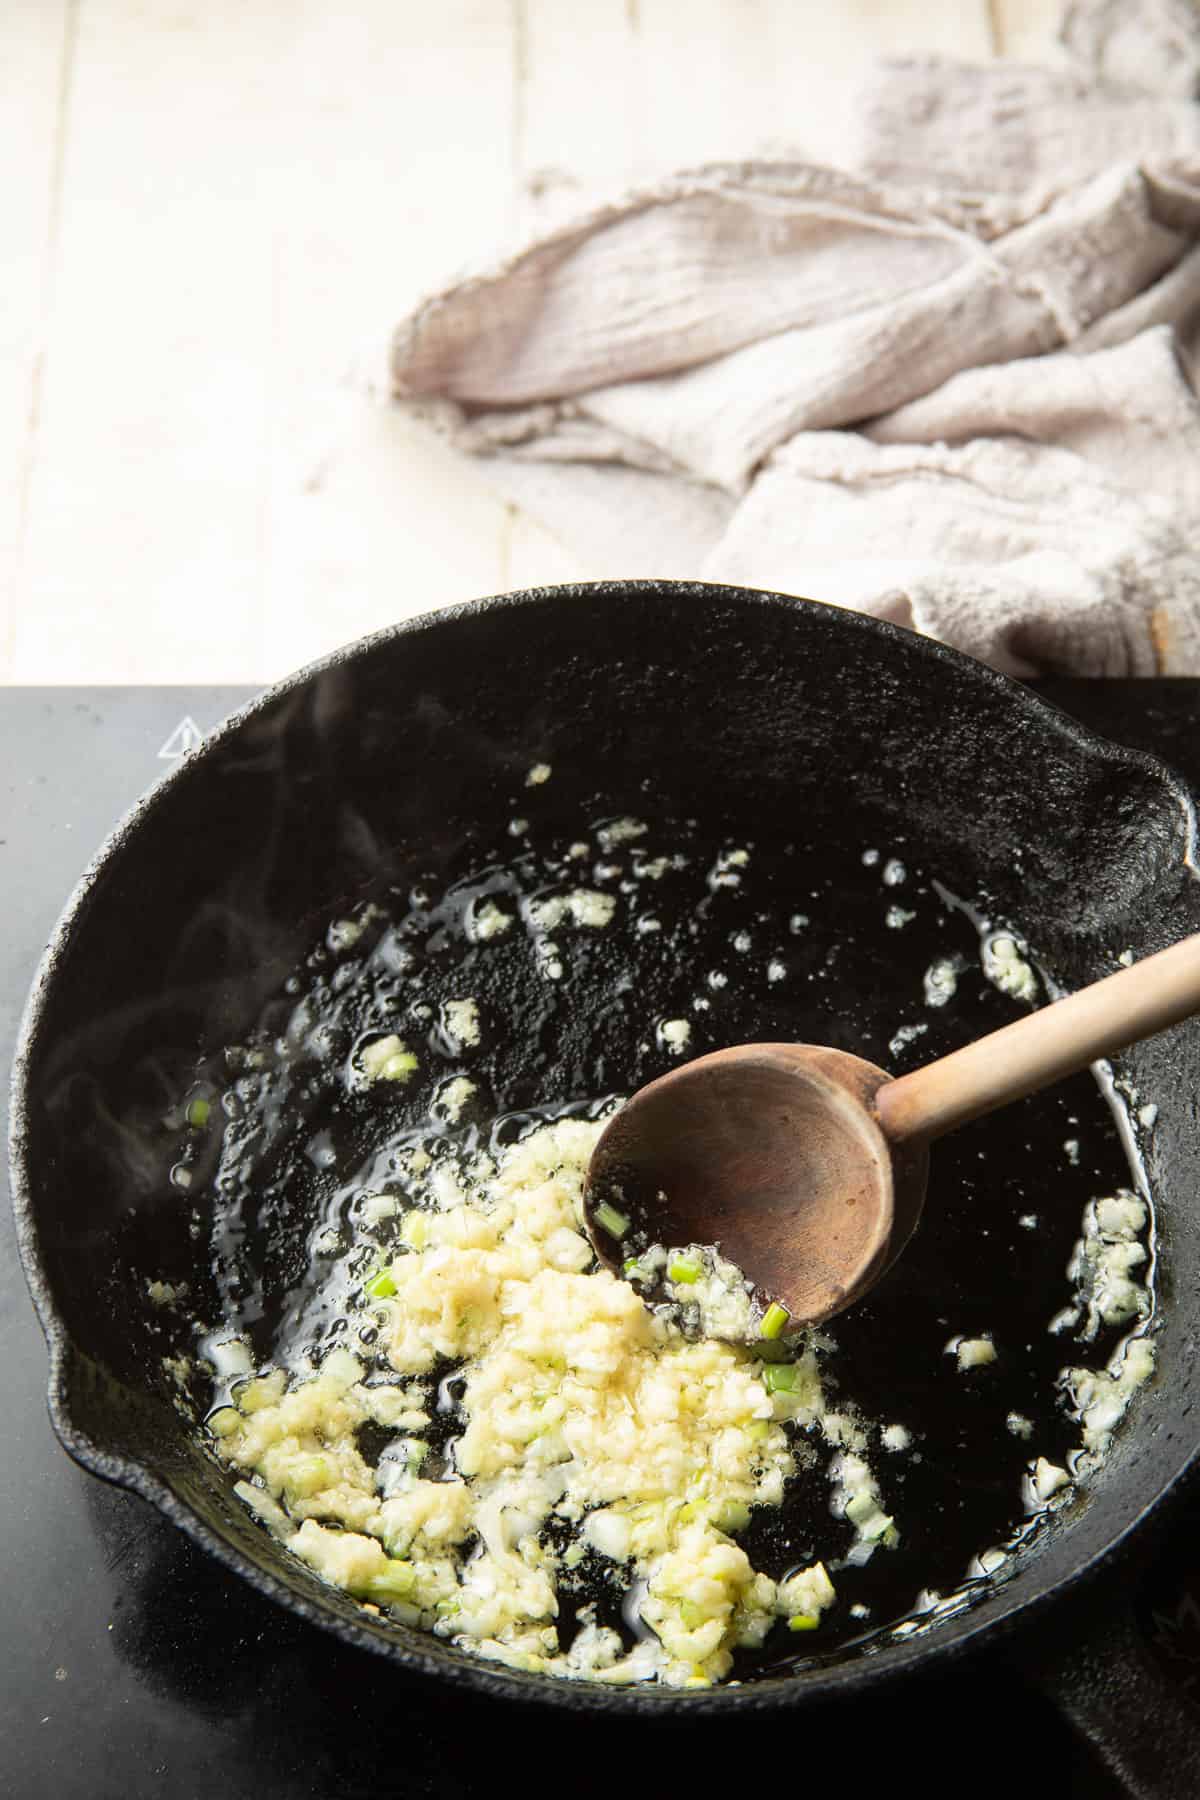 Minced garlic and grated ginger cooking in a skillet with wooden spoon.